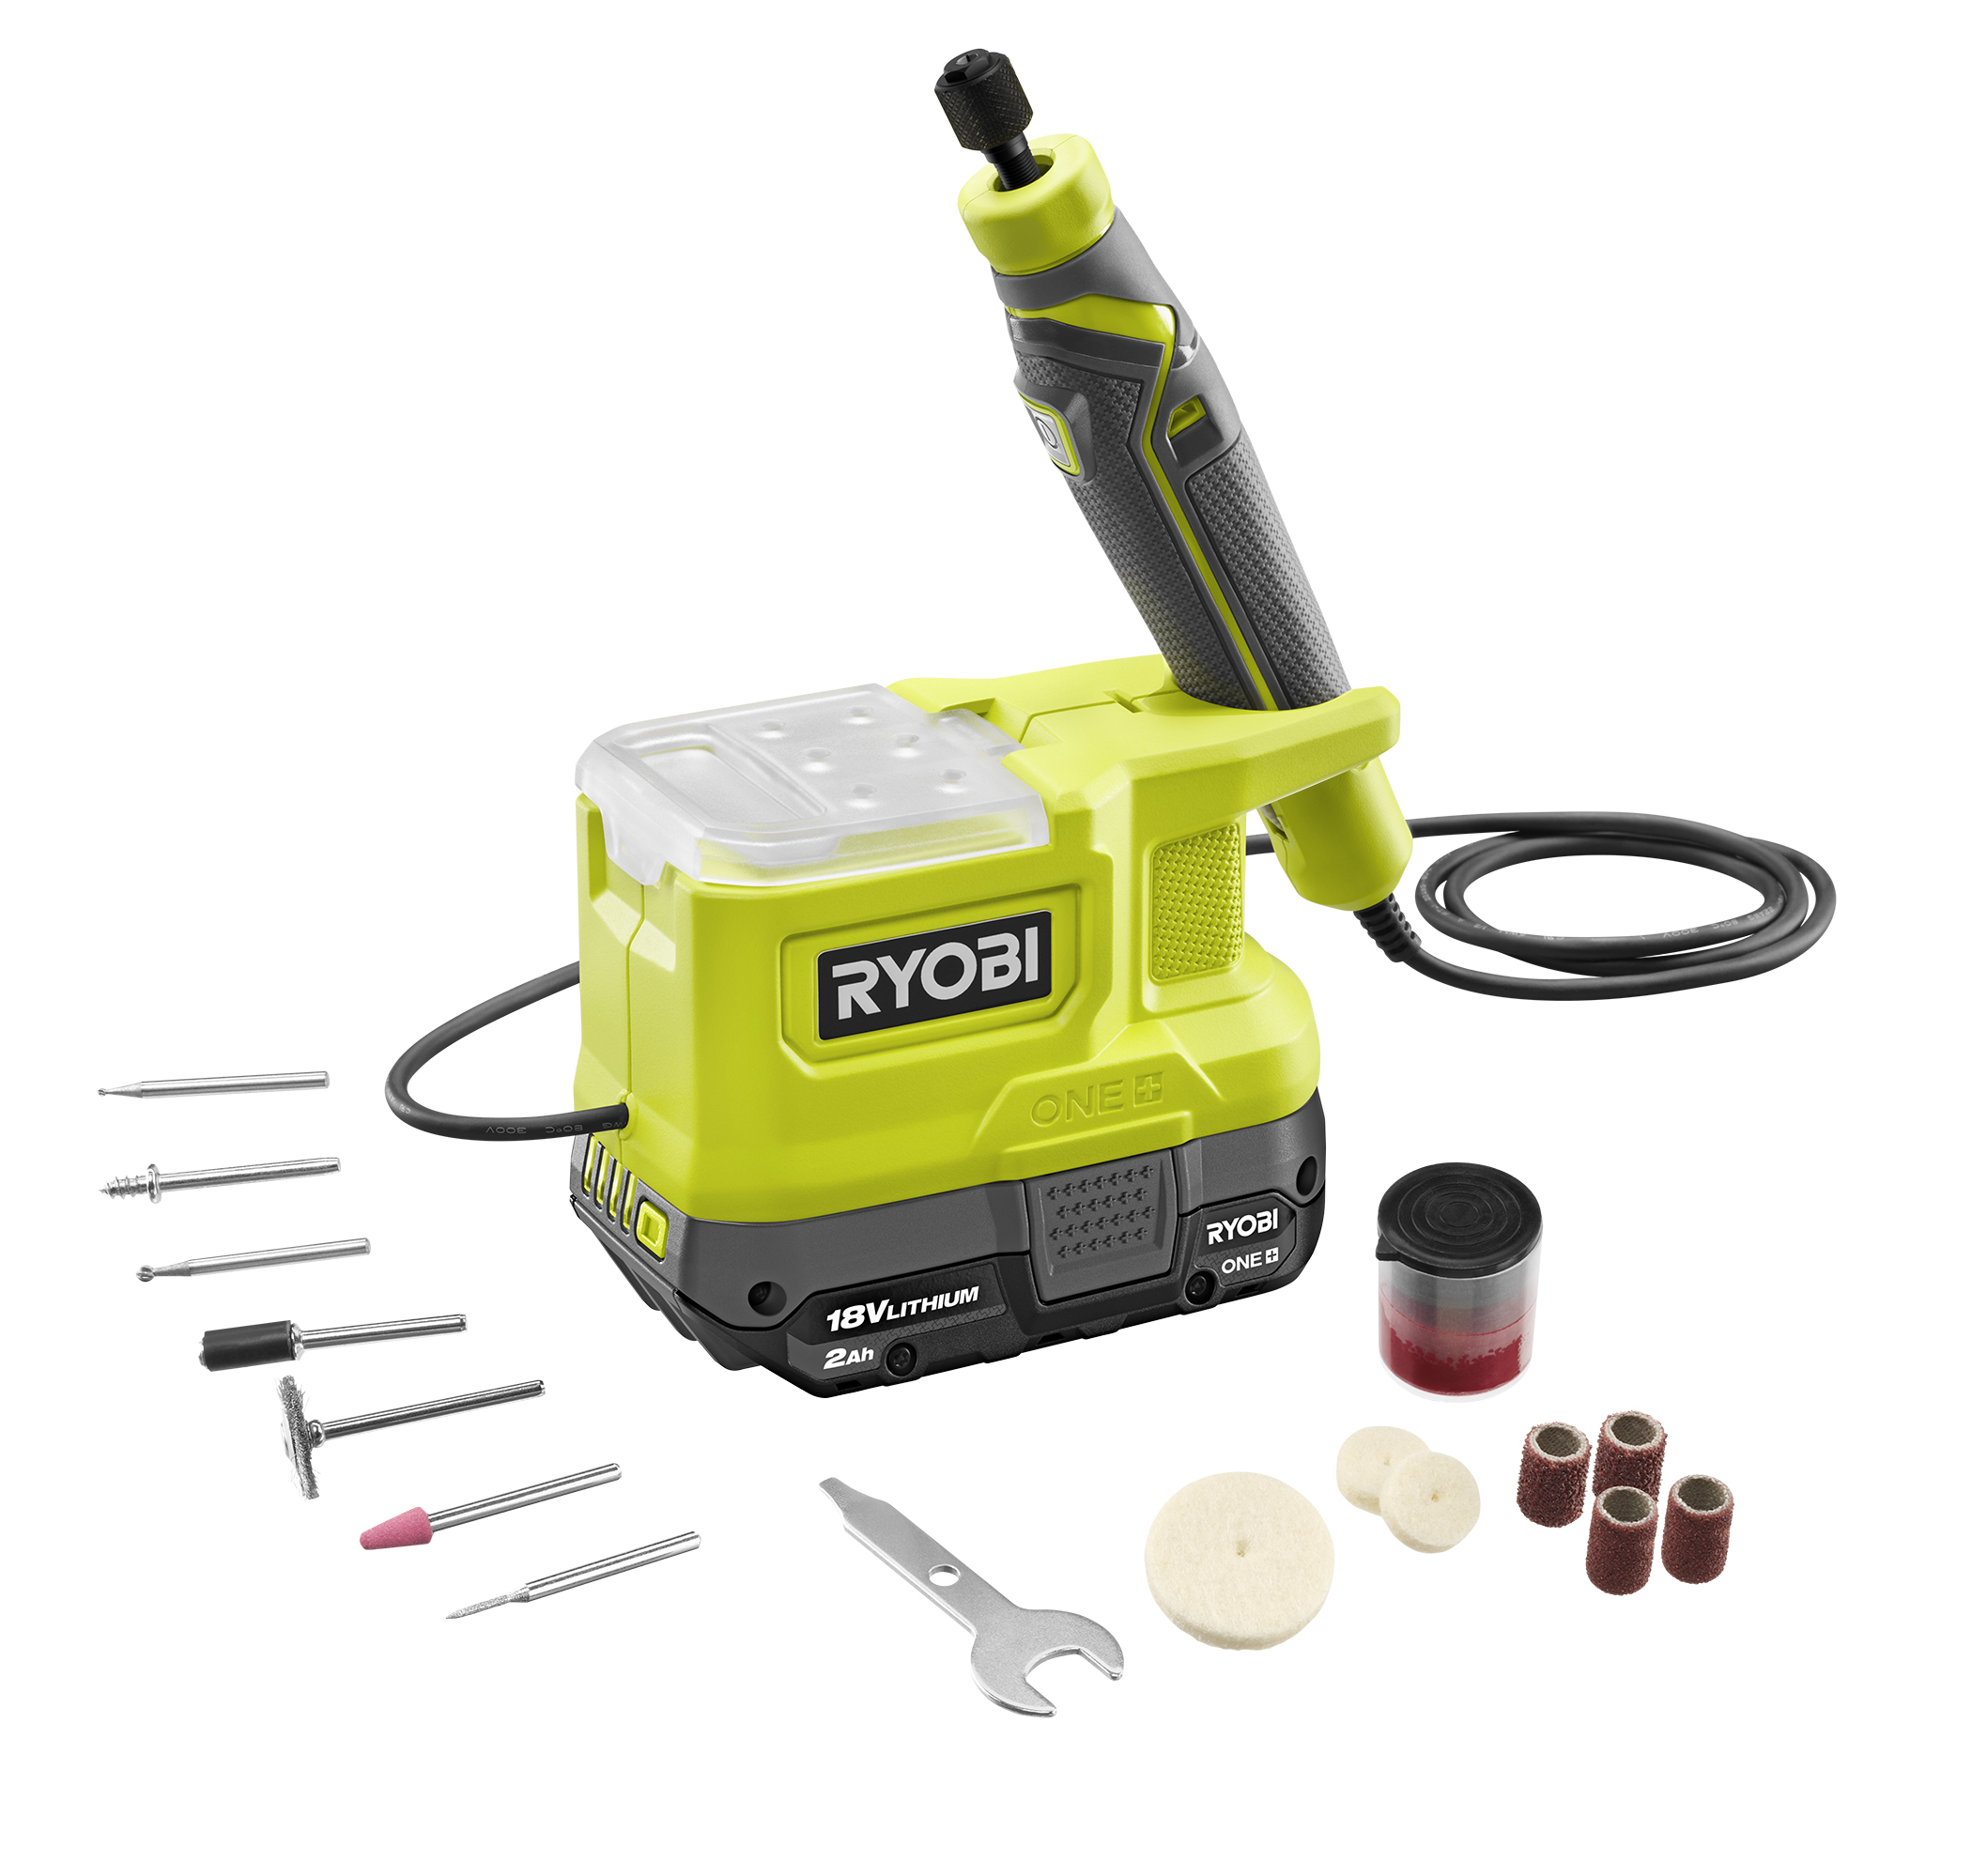 This new rotary tool makes for a great tungsten grinder : r/ryobi